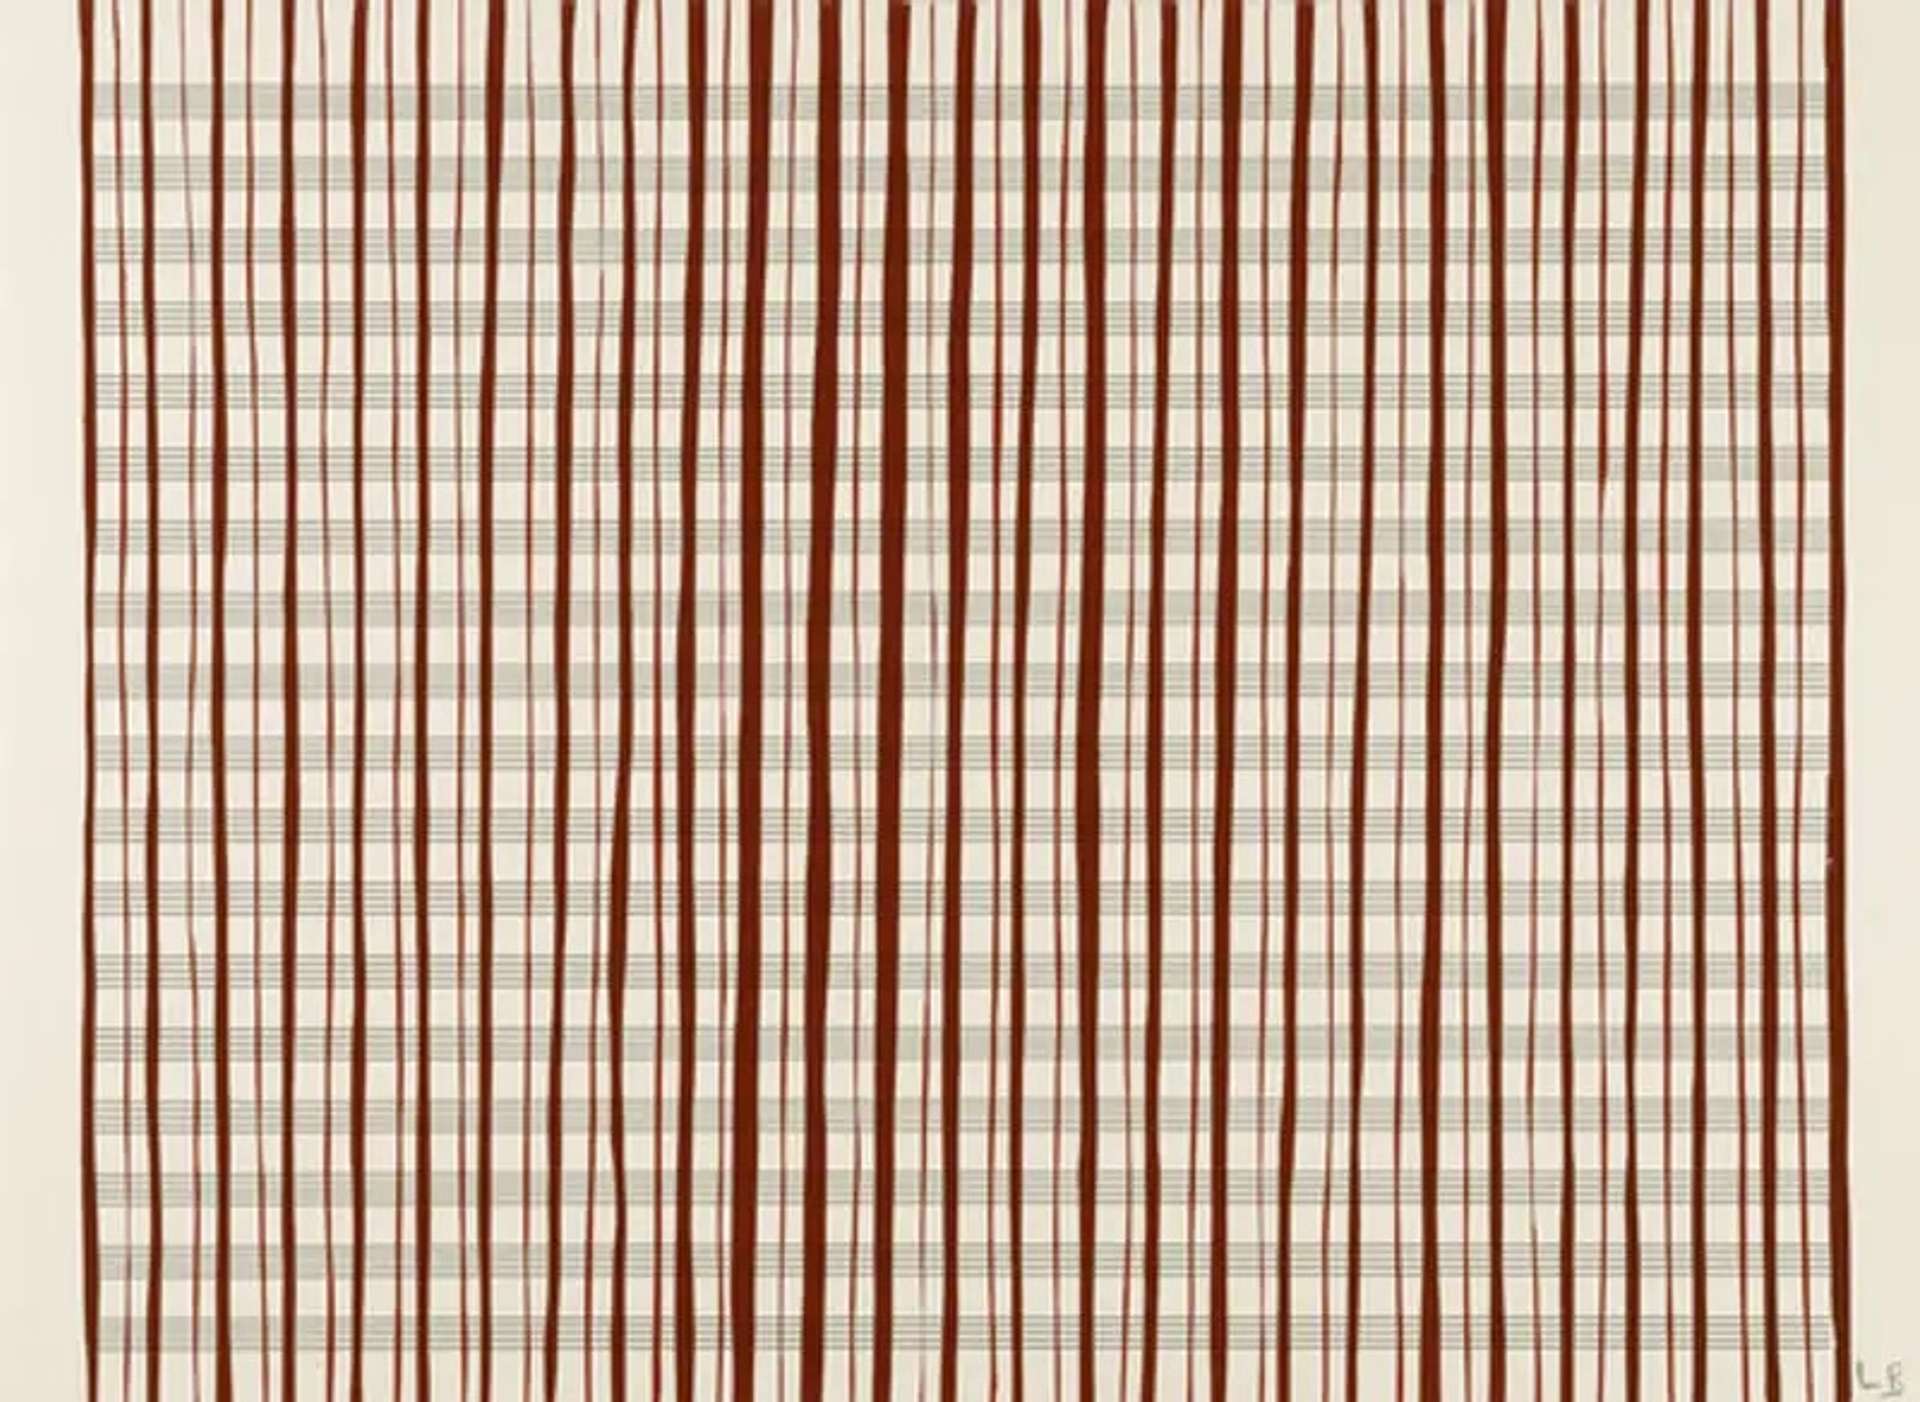 Louise Bourgeois’ Untitled #3. A screenprint of red vertical lines against a sheet of horizontal lines.